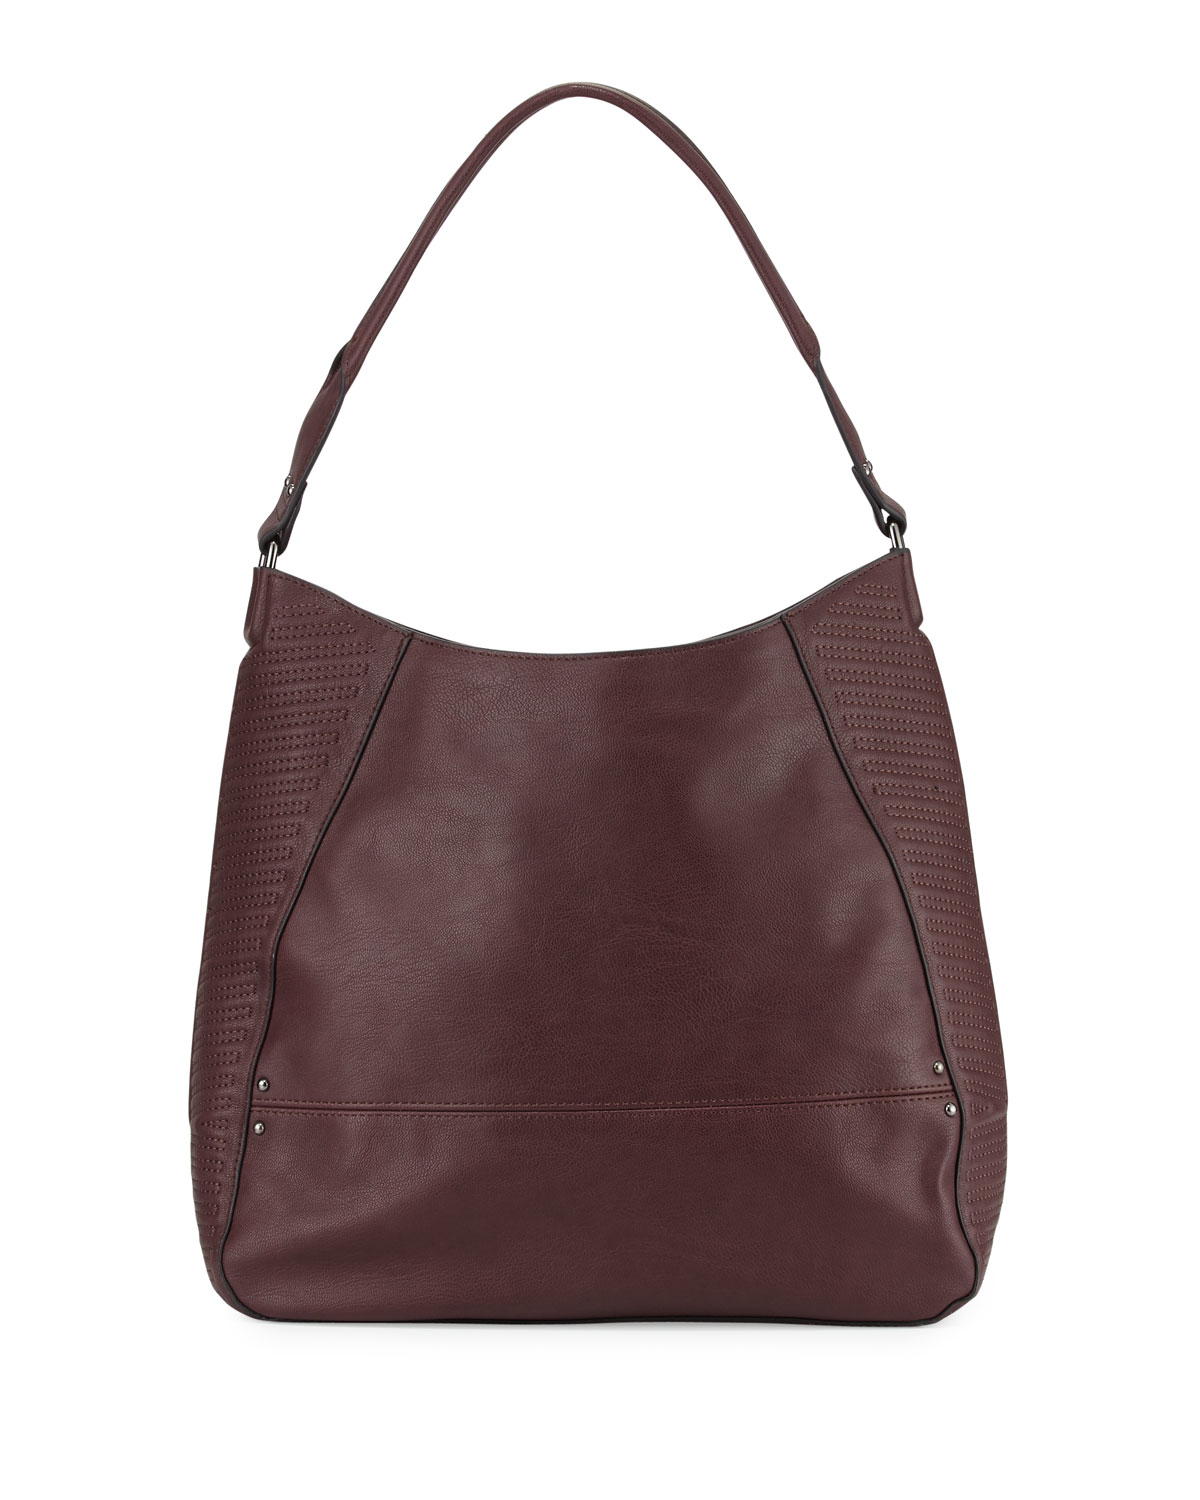 French connection Dakota Faux-leather Hobo Bag in Brown | Lyst